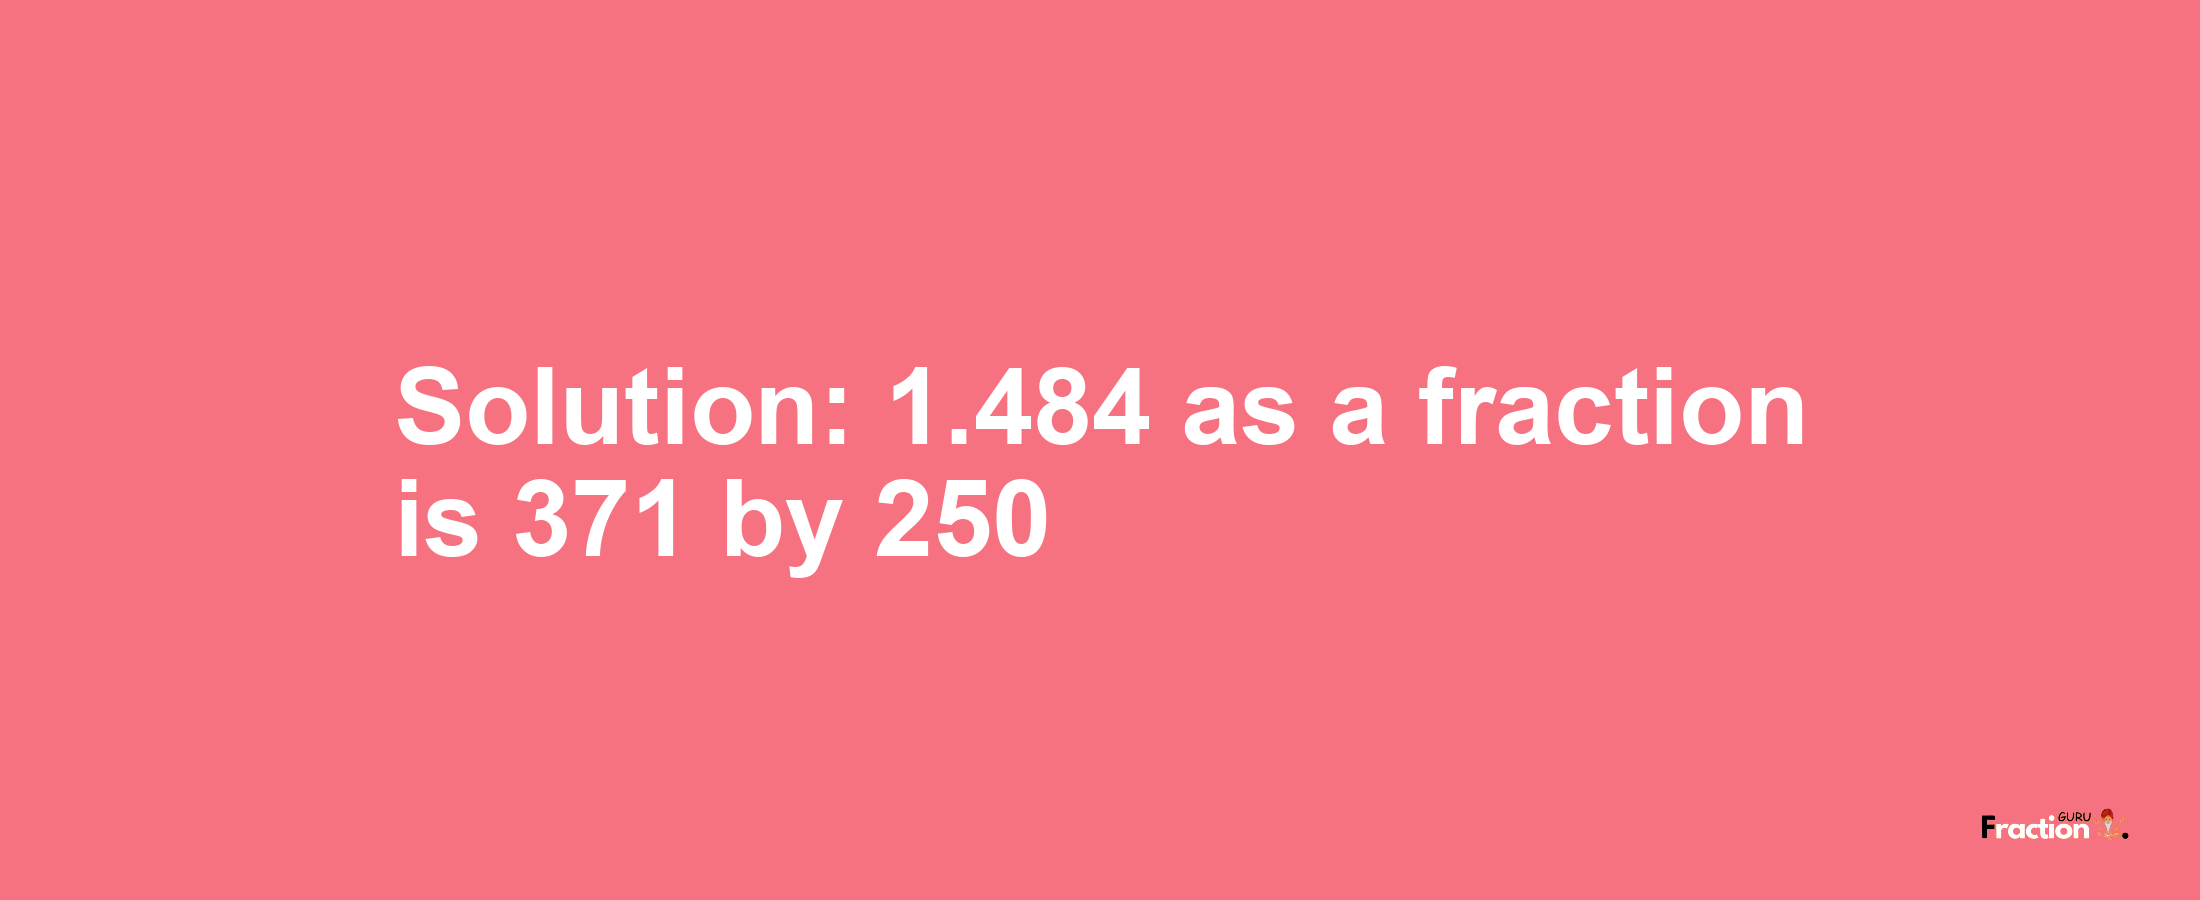 Solution:1.484 as a fraction is 371/250